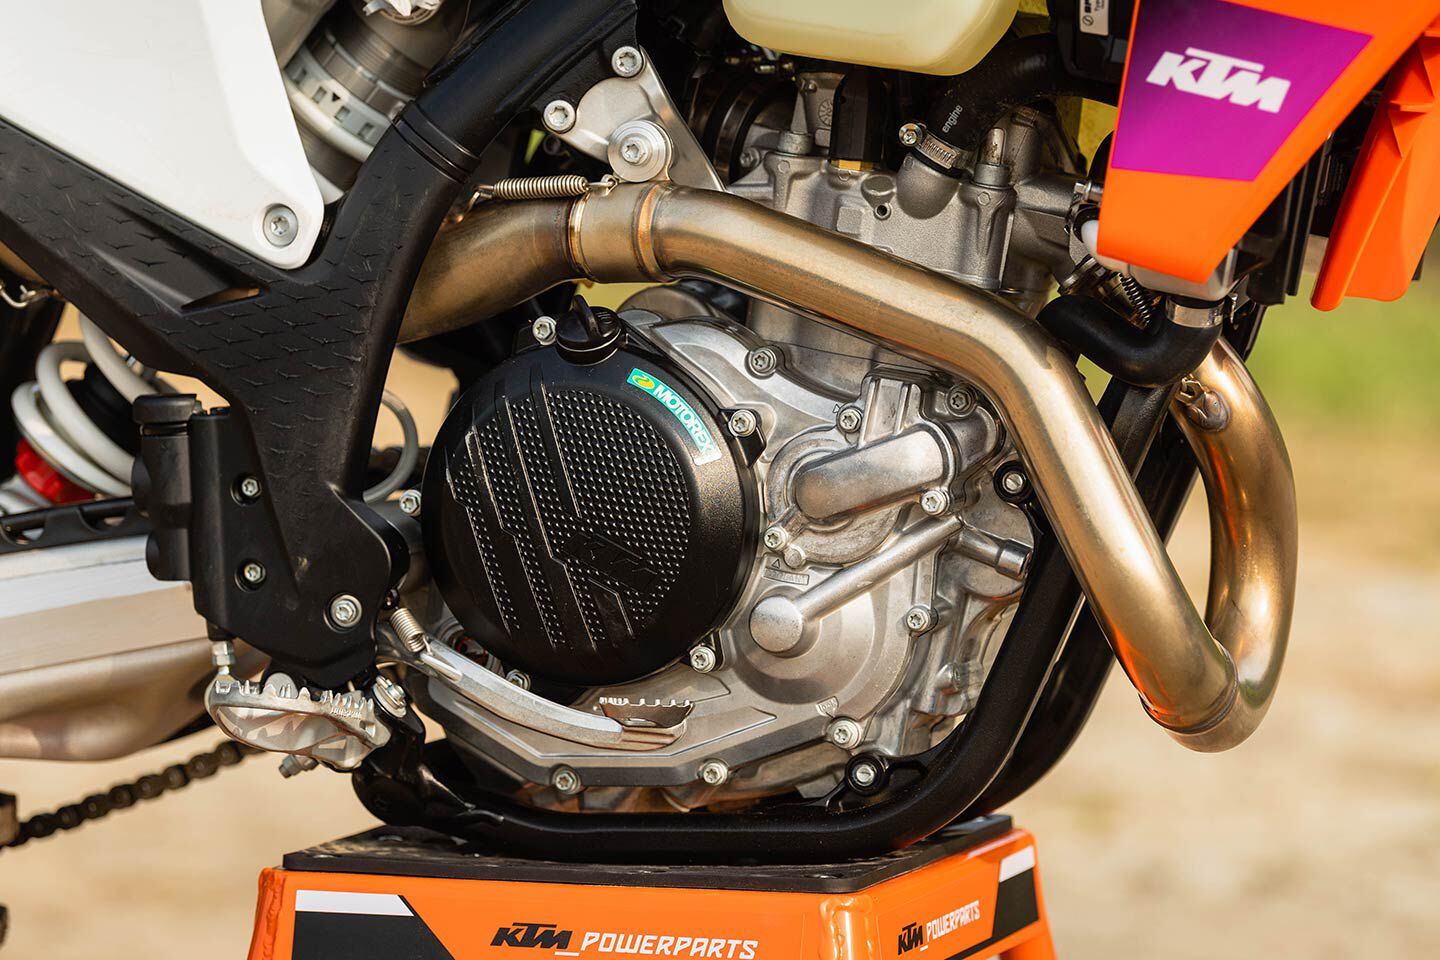 The 450 XCF-W’s powerplant is the same as the 450 SX-F and 450 XC-F’s with its new compact cylinder head that debuted on those models in 2023. The big difference is the enduro uses a wide-ratio six-speed gearbox.